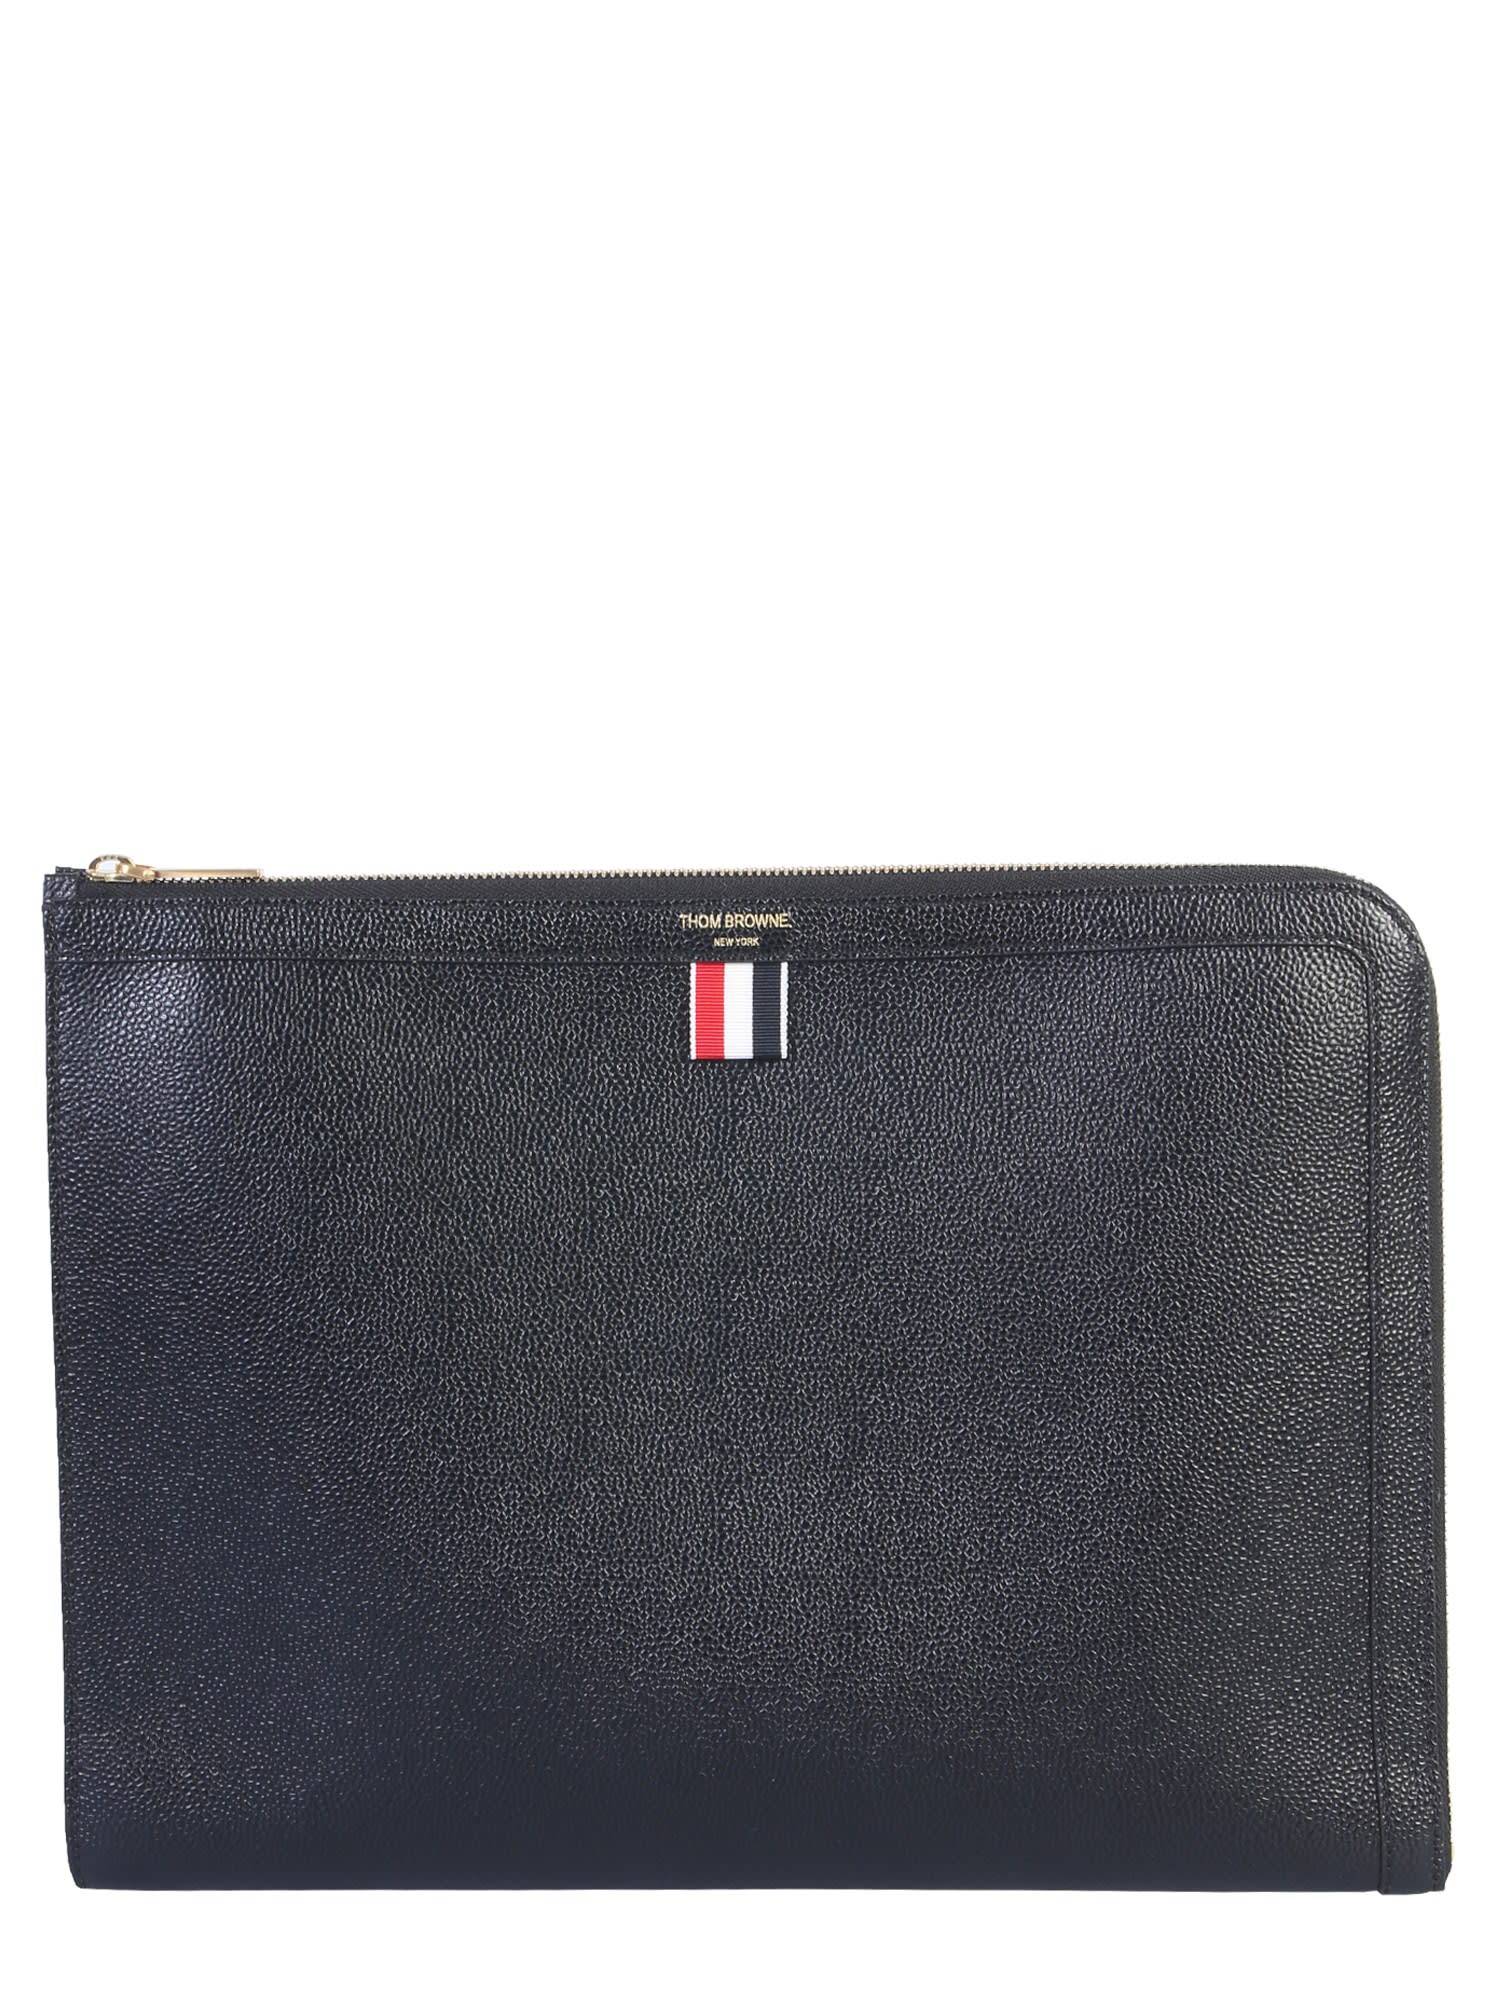 Thom Browne Large Document Holder In Nero